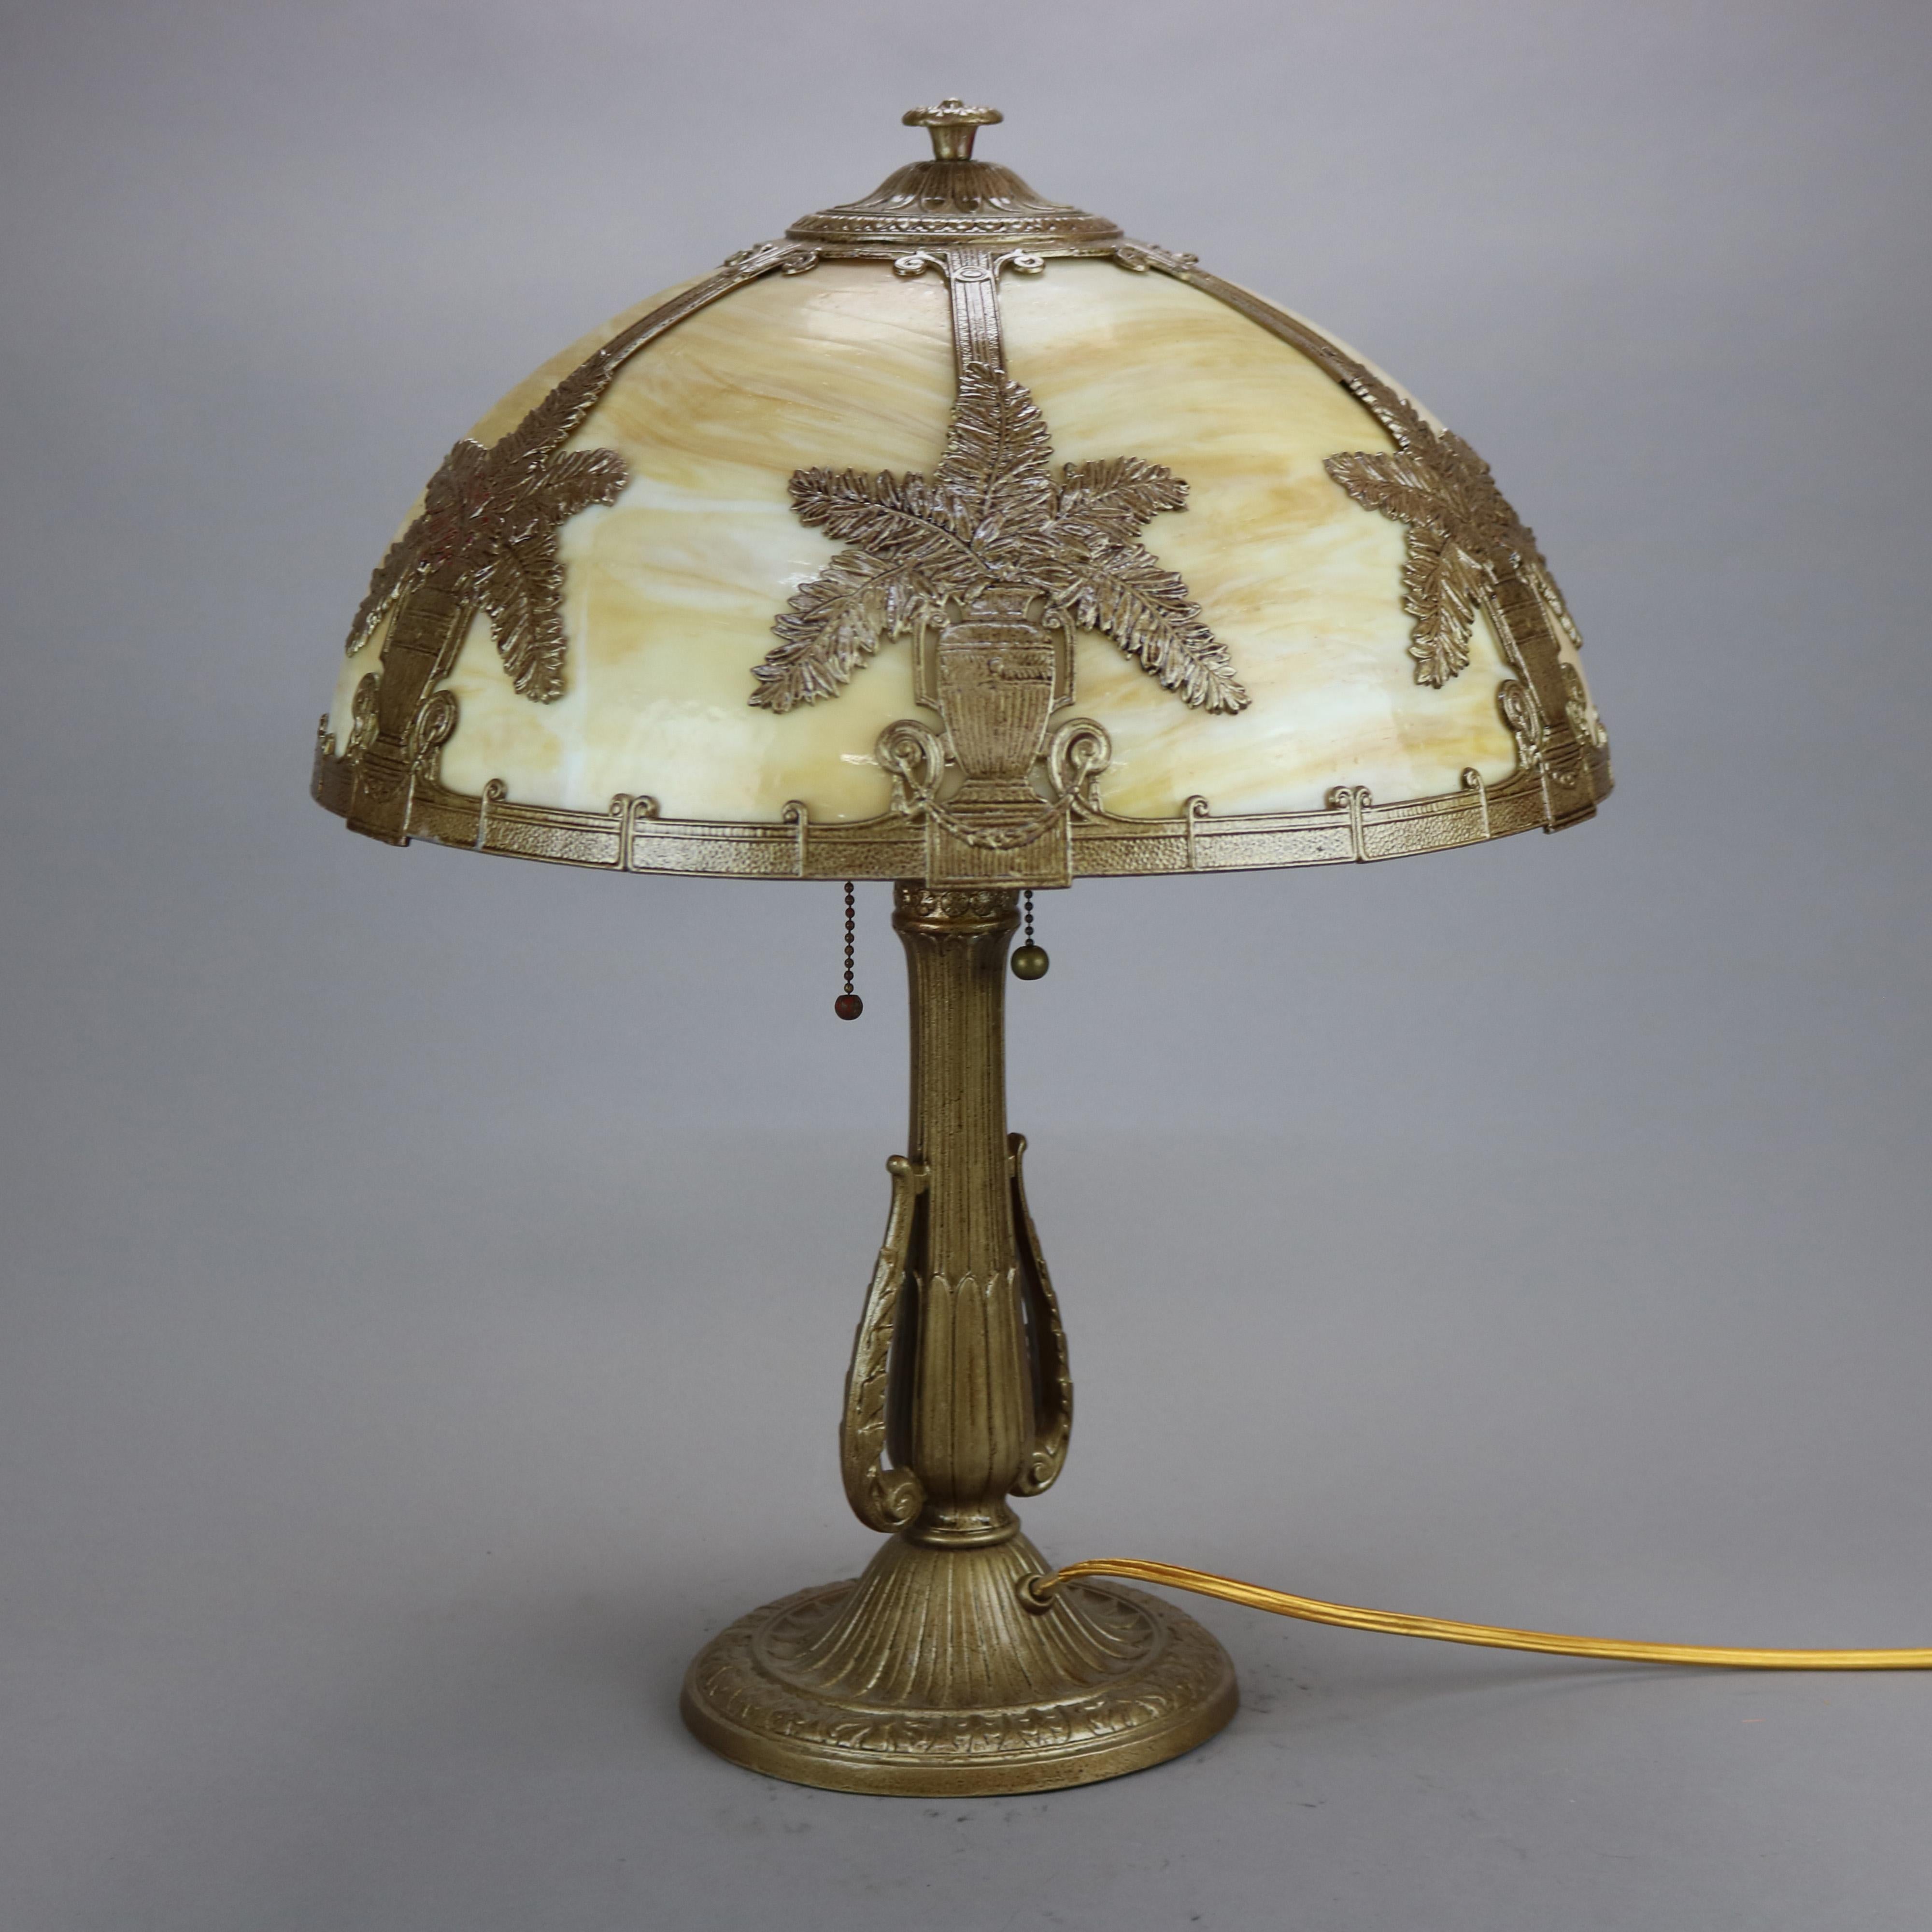 An antique Arts & Crafts table lamp in the manner of Bradley and Hubbard offers dome form shade with cast foliate urn pattern and housing bent slag glass panels over double socket cast base, c1920

Measures - 22.25'' H x 17.25'' W x 17.25''